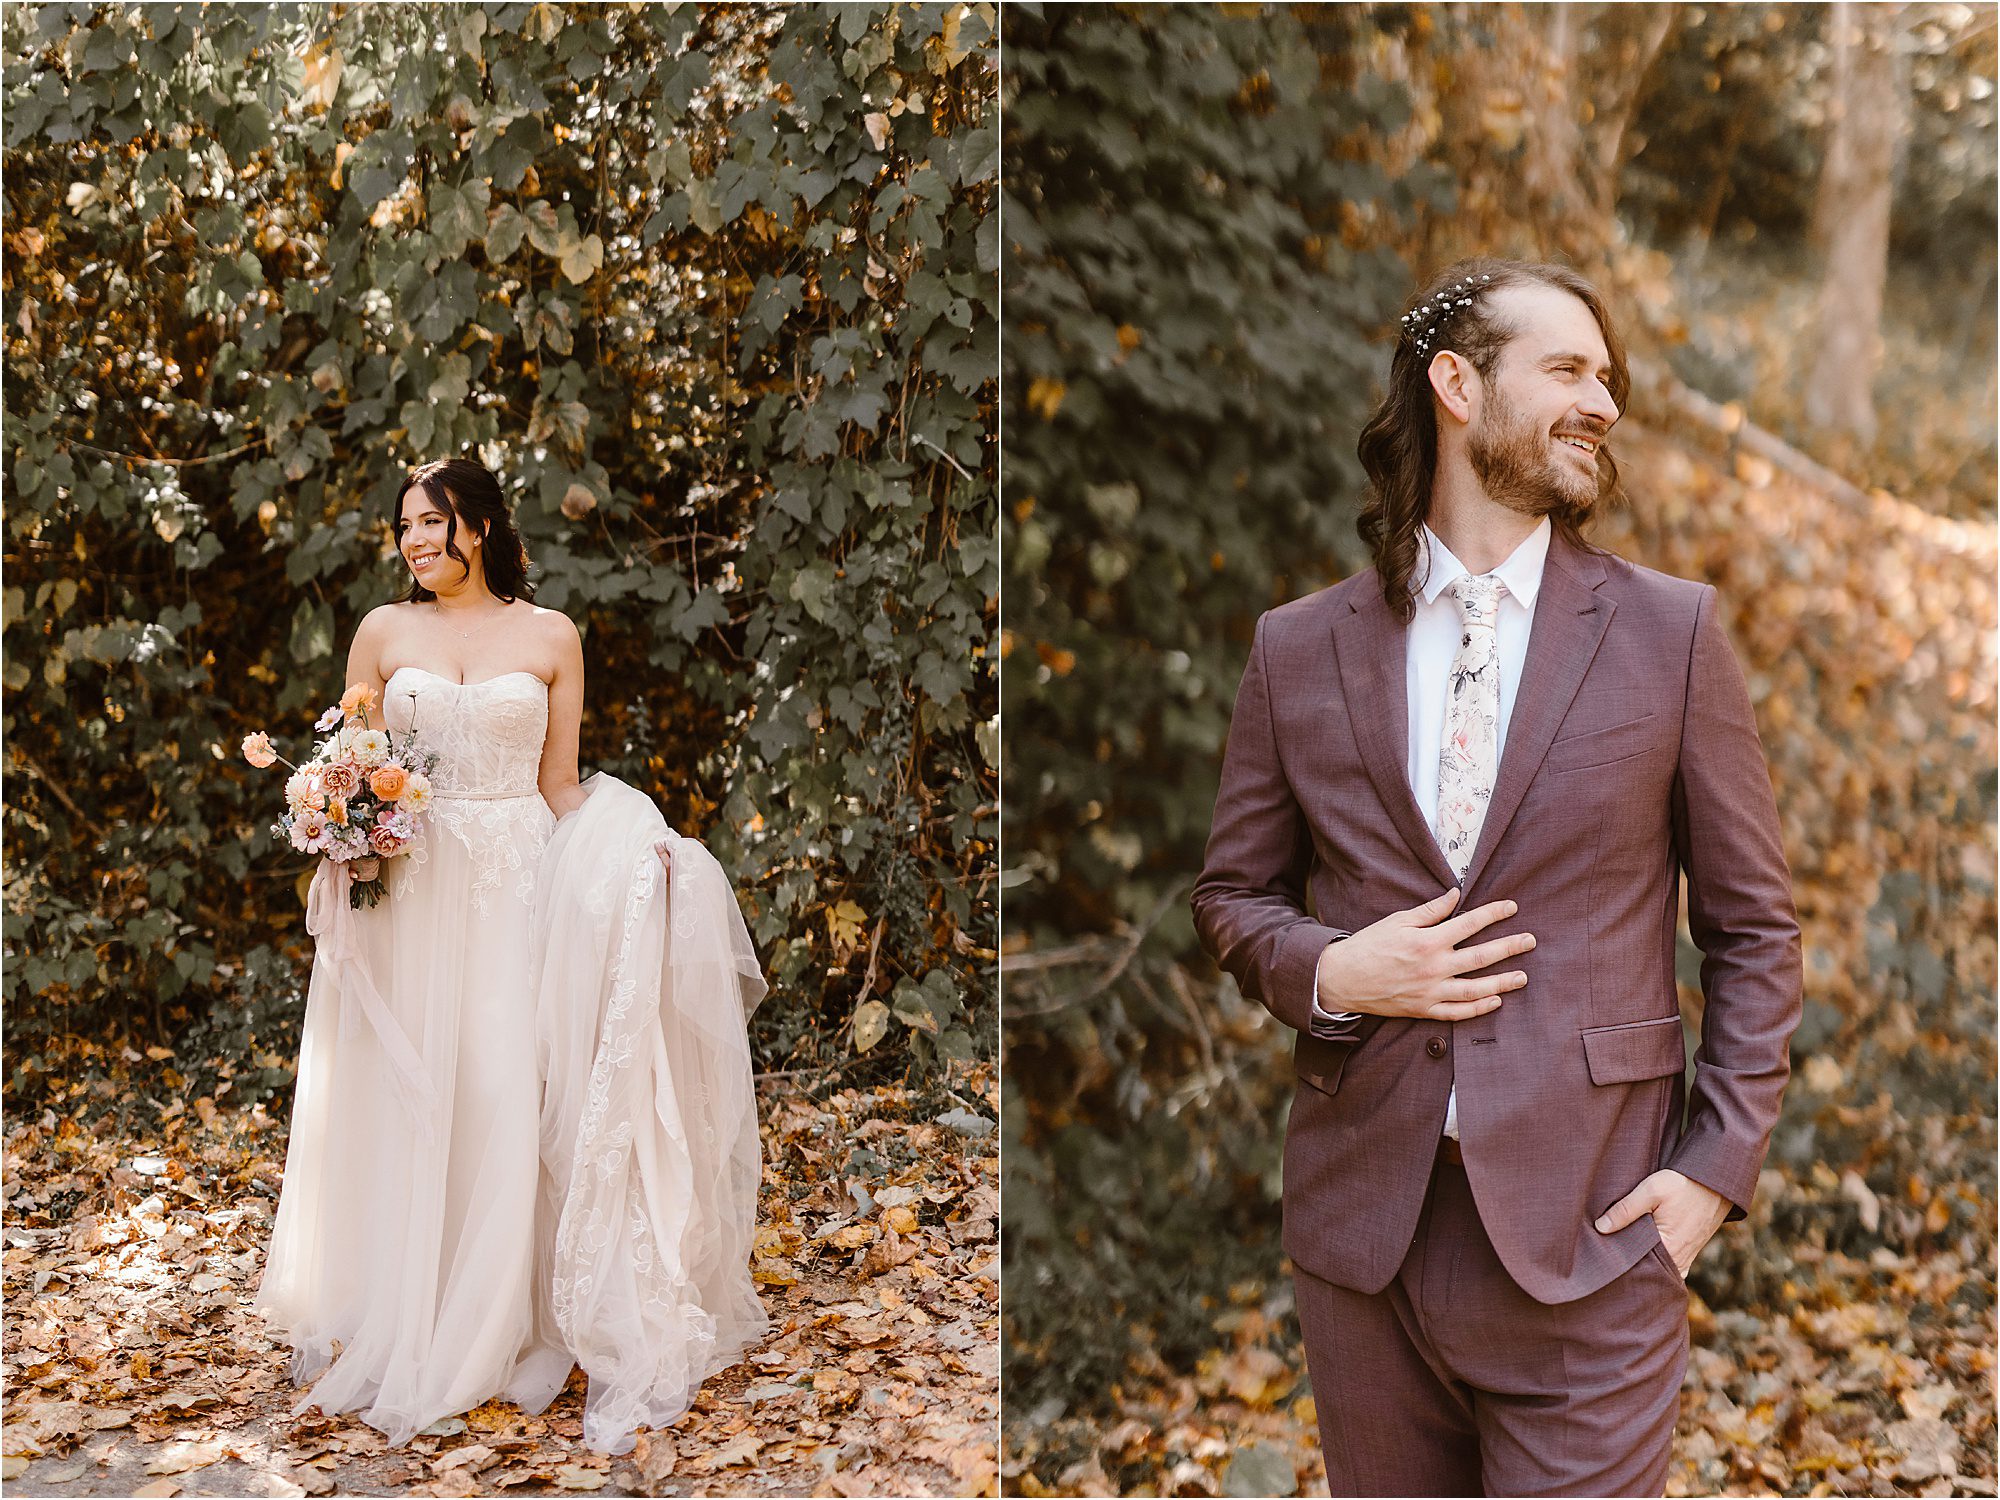 bride holds wedding bouquet while standing on fall leaves and groom wearing baby's breath in hair